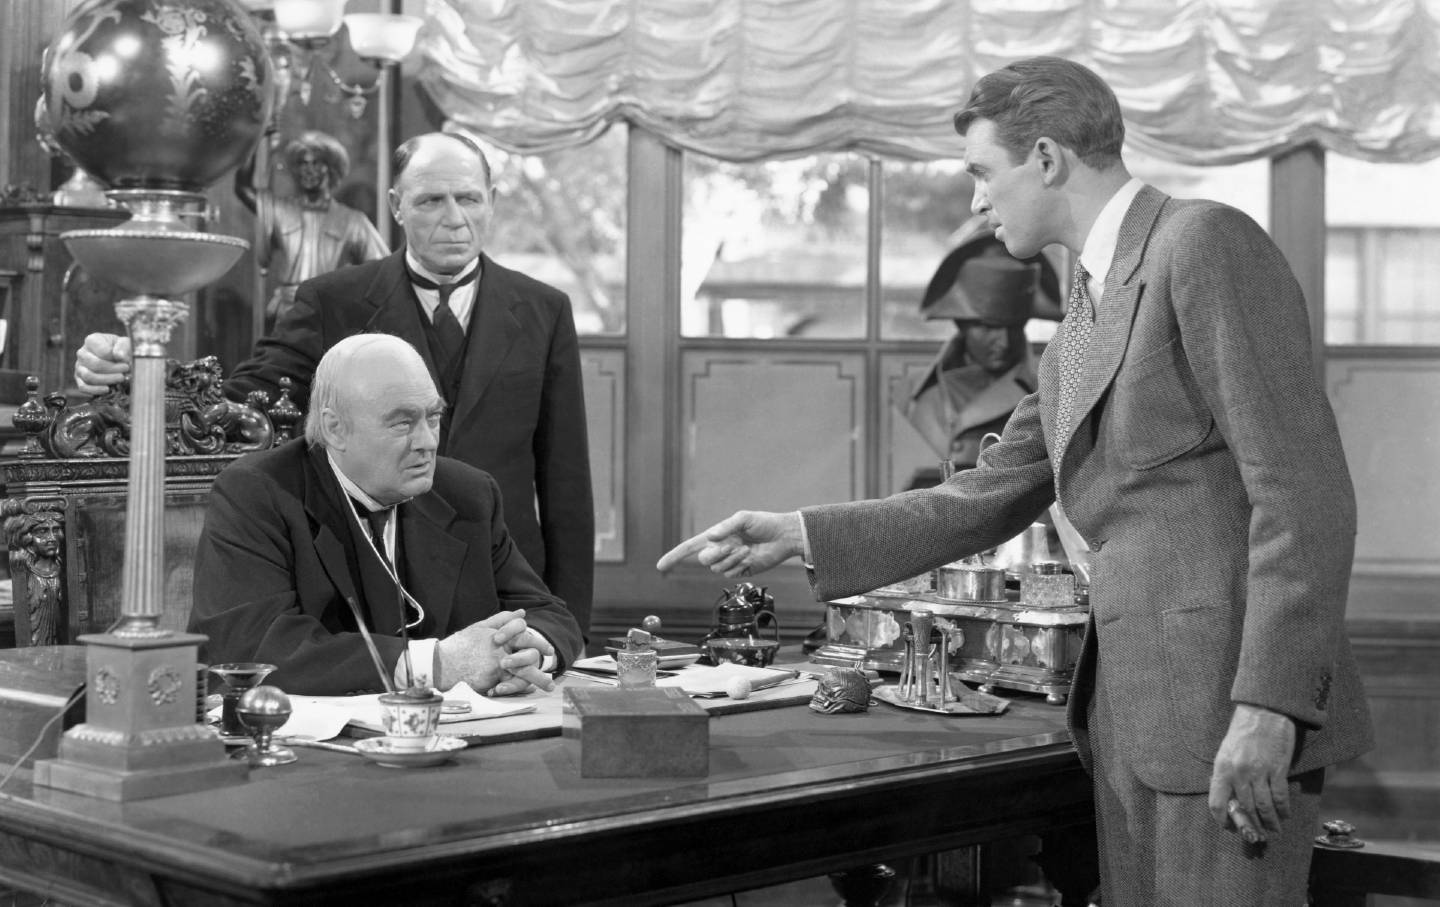 James Stewart, as George Bailey, points at Lionel Barrymore in a scene from “It's a Wonderful Life.”